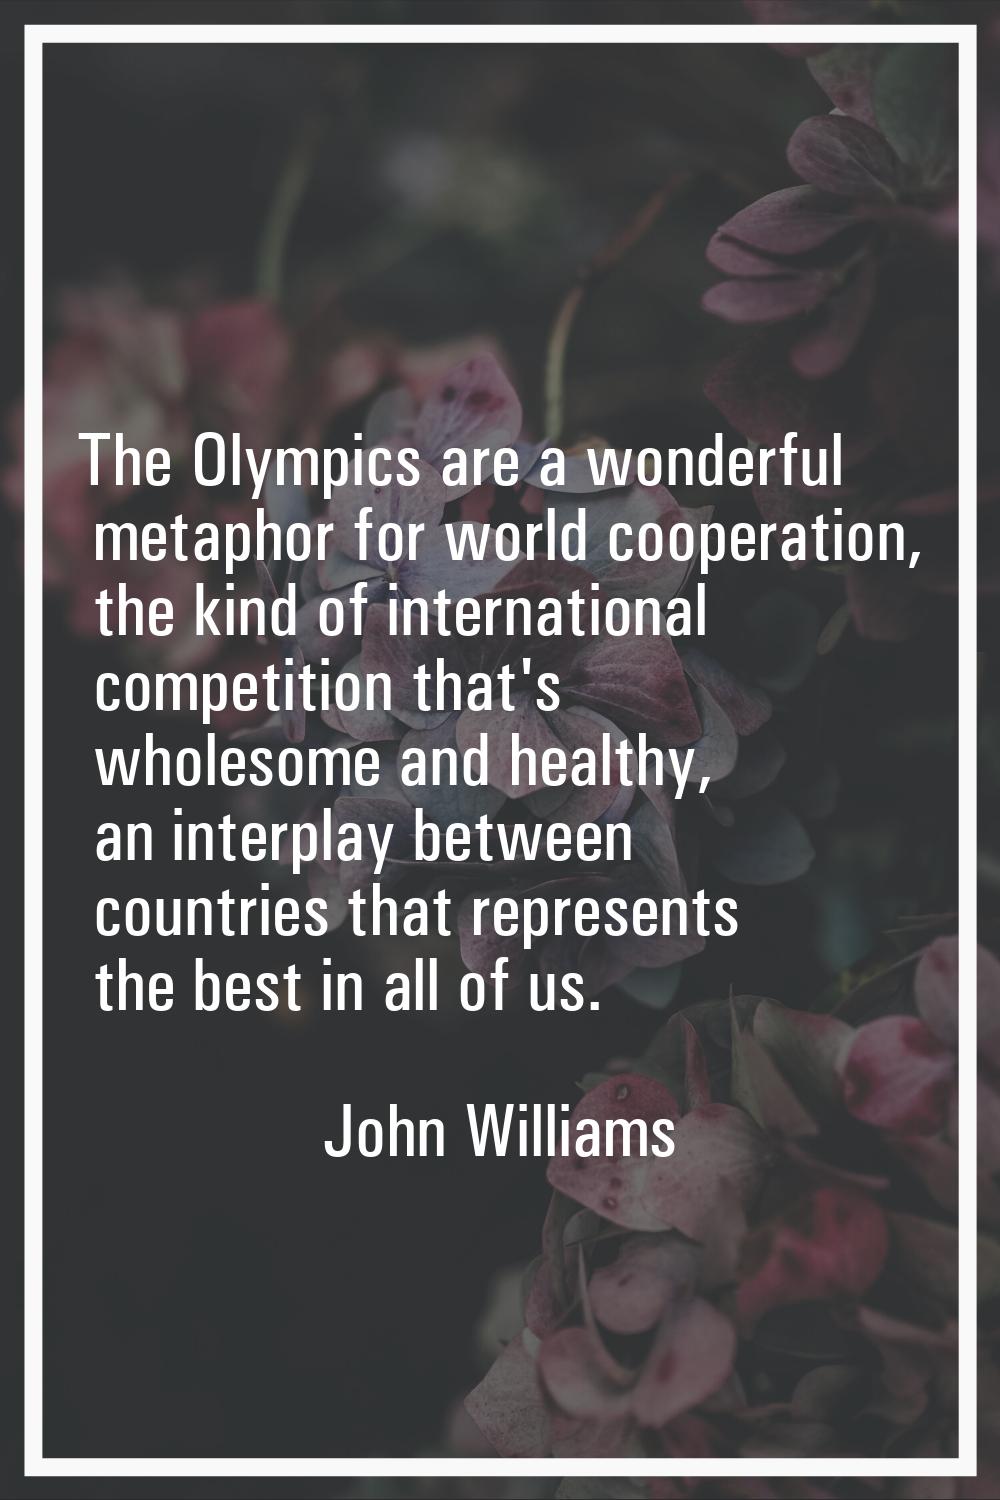 The Olympics are a wonderful metaphor for world cooperation, the kind of international competition 